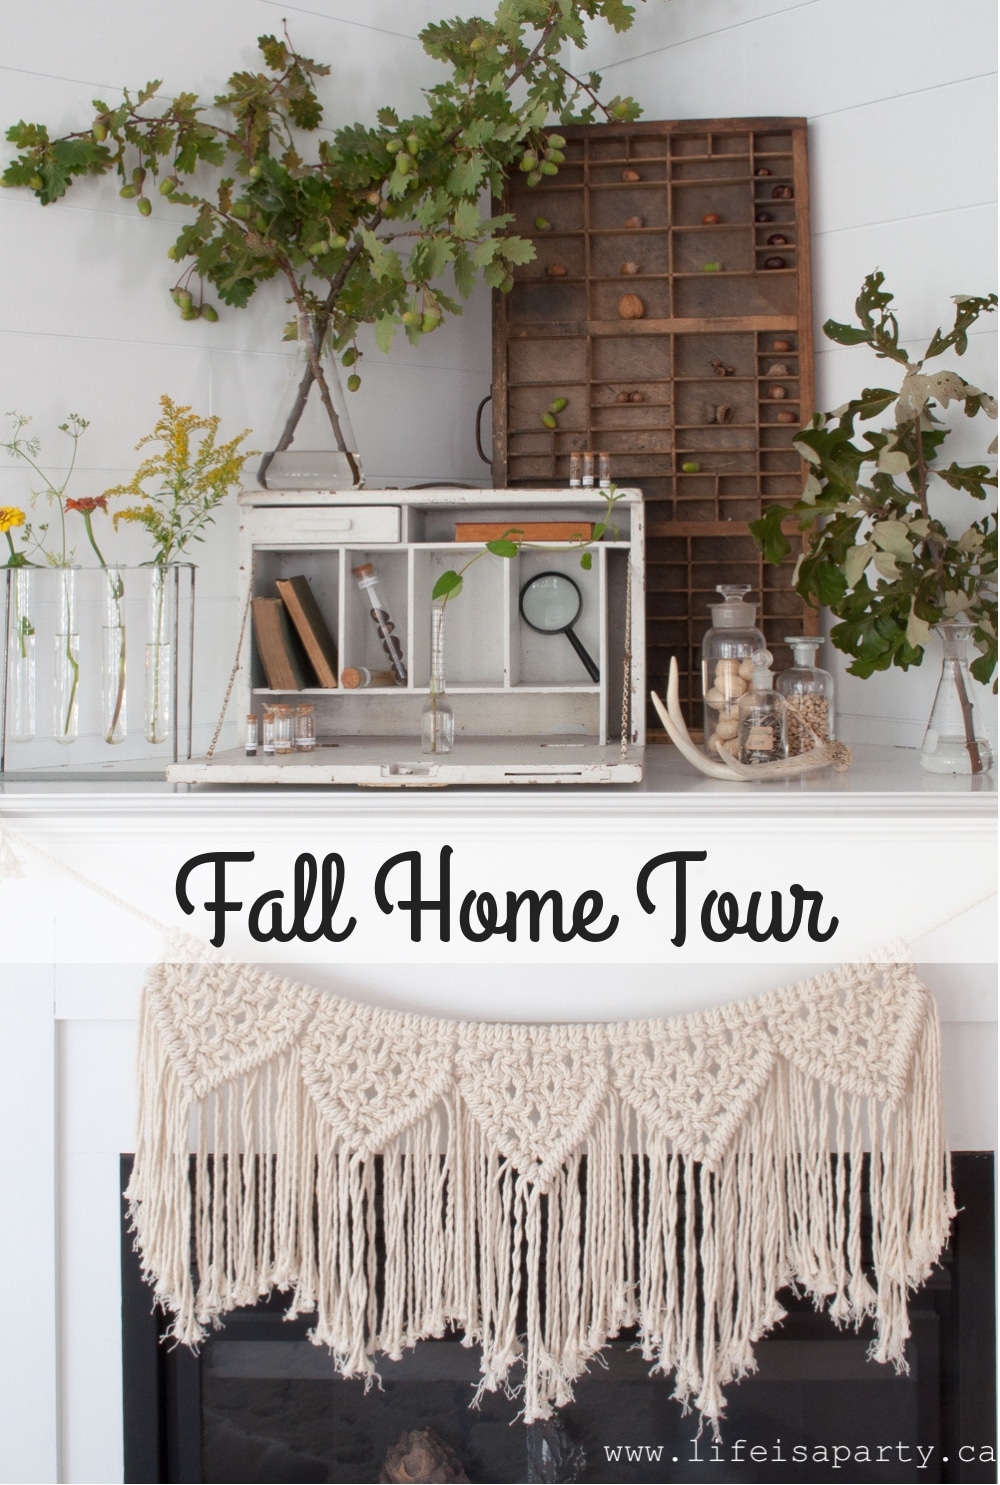 Fall Home Tour: With a nod to science this botanical scientific vintage decor brings the outdoors in, with lots of neutrals and mustard yellow.